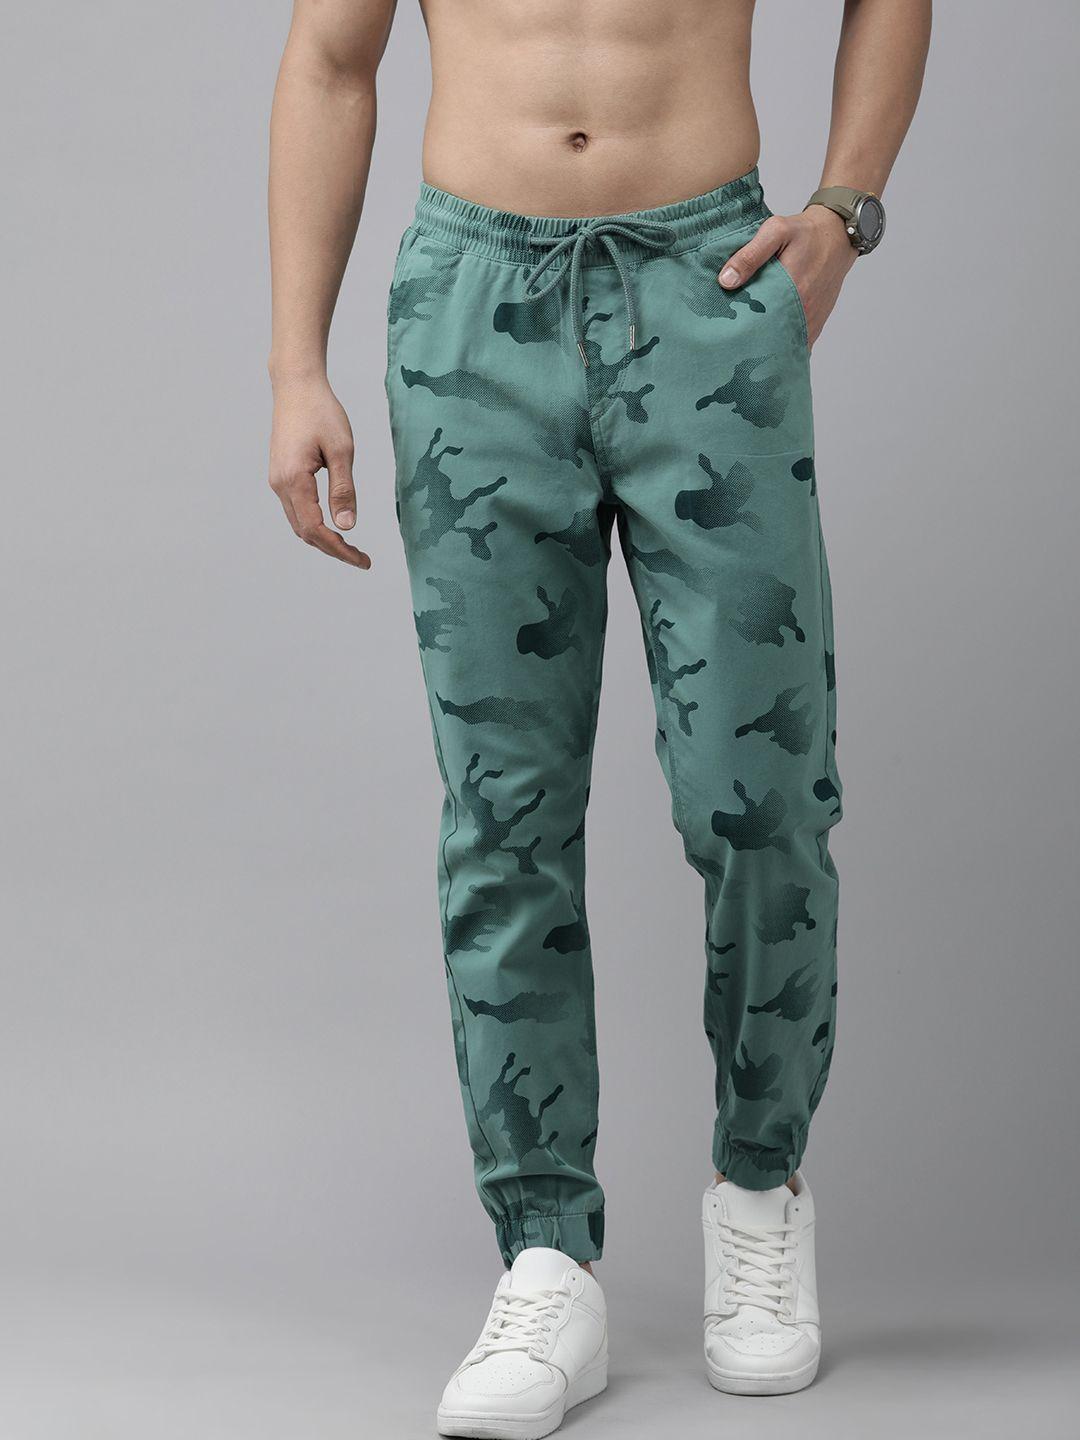 the-roadster-lifestyle-co.-men-camouflage-printed-pleated-joggers